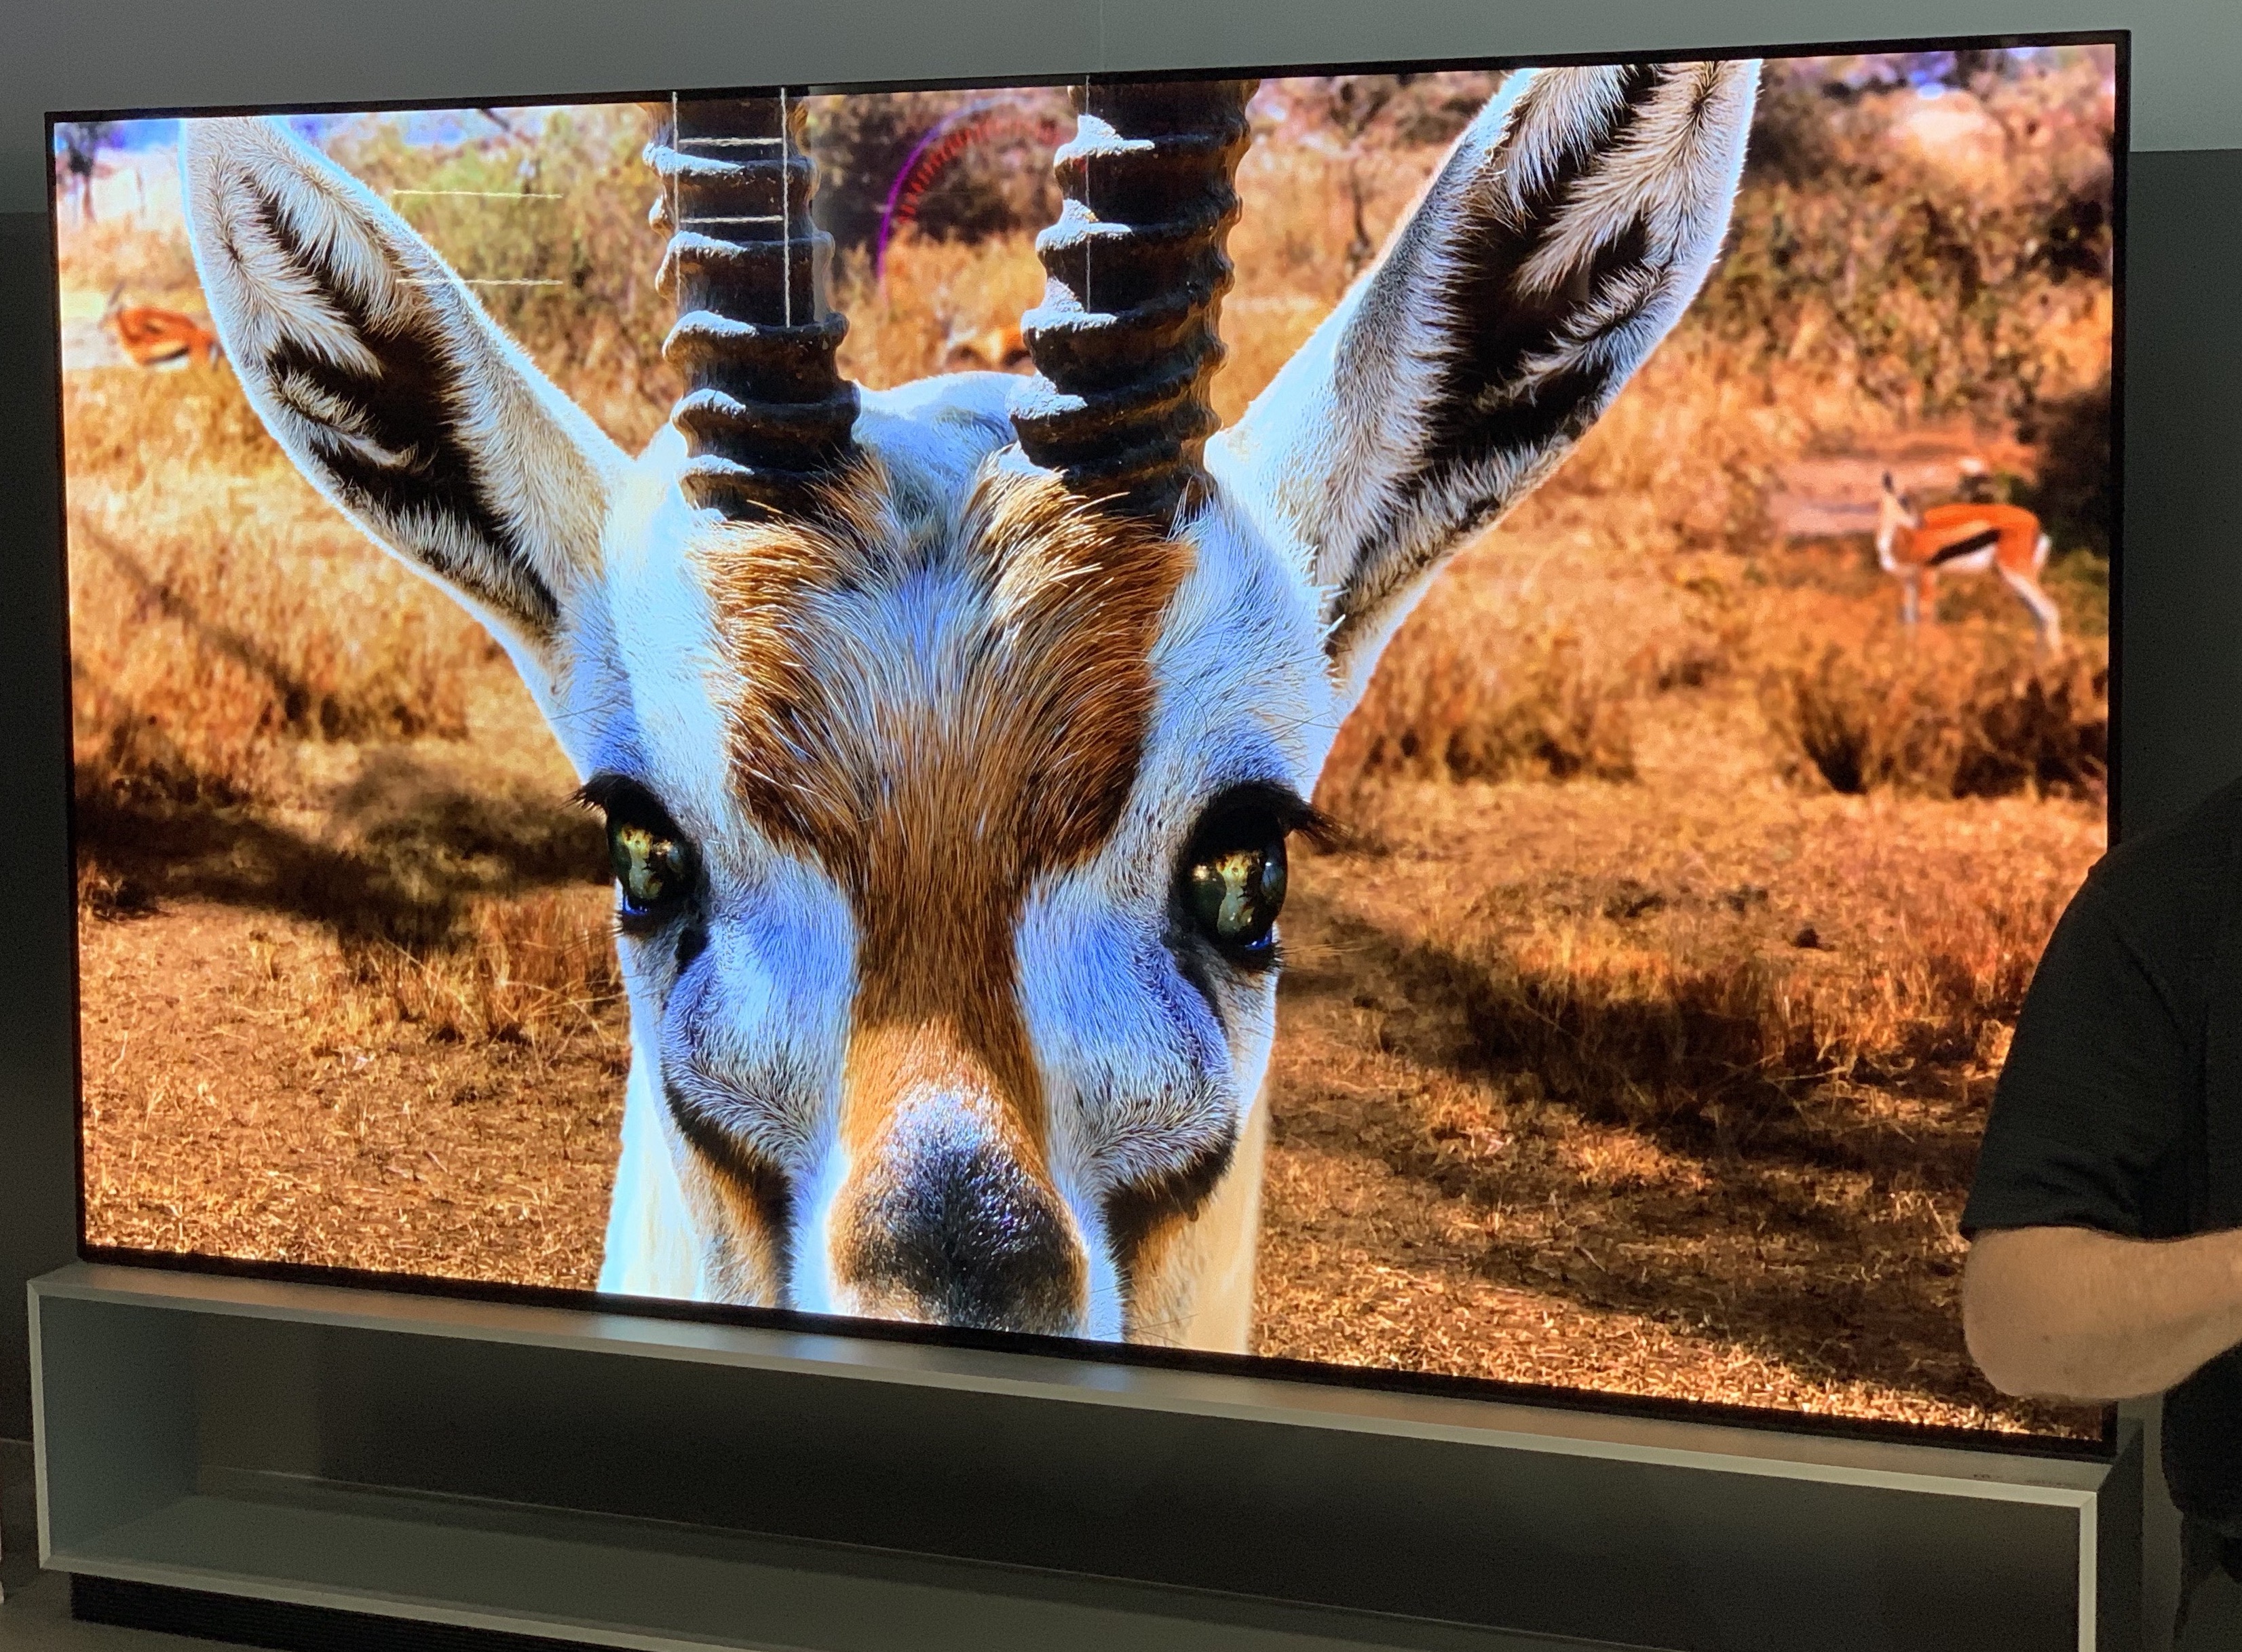 sick 8k TV from LG